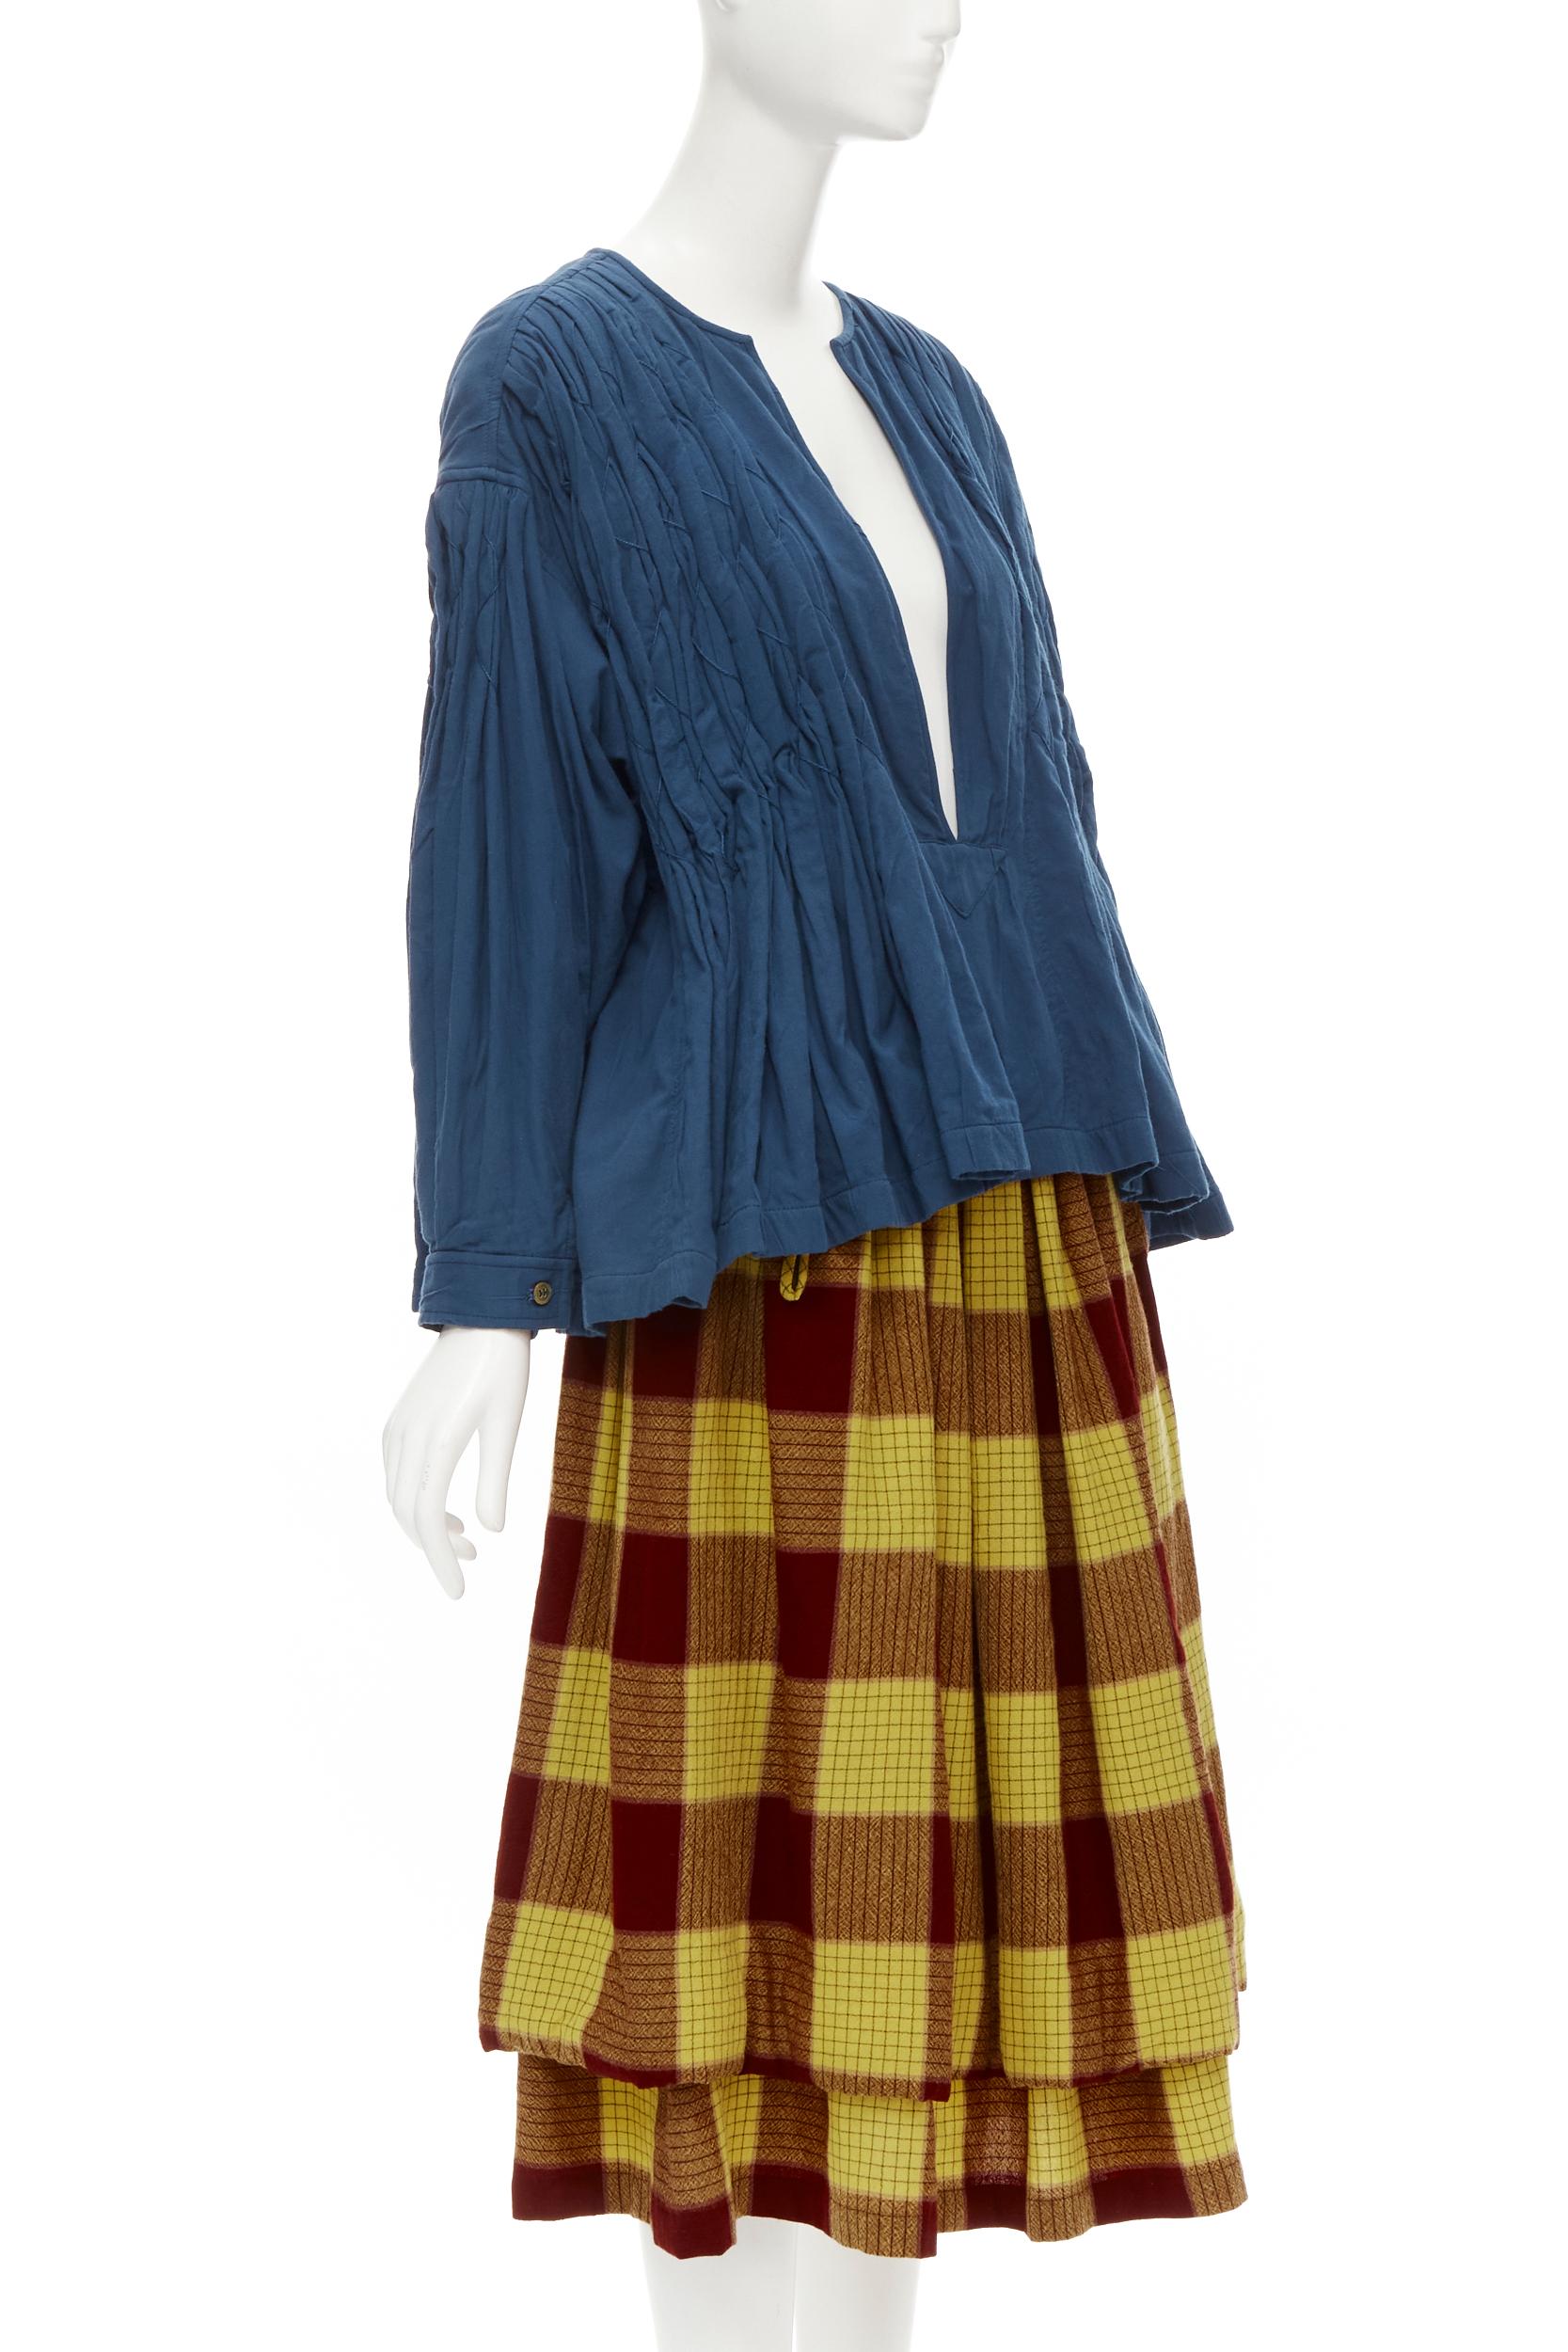 COMME DES GARCONS 1980's Vintage blue shirred stitch top layered checked skirt M
Brand: Comme Des Garcons
Designer: Rei Kawakubo
Material: Cotton
Color: Blue
Pattern: Checkered
Closure: Zip
Extra Detail: Top: Double faced cotton for a padded